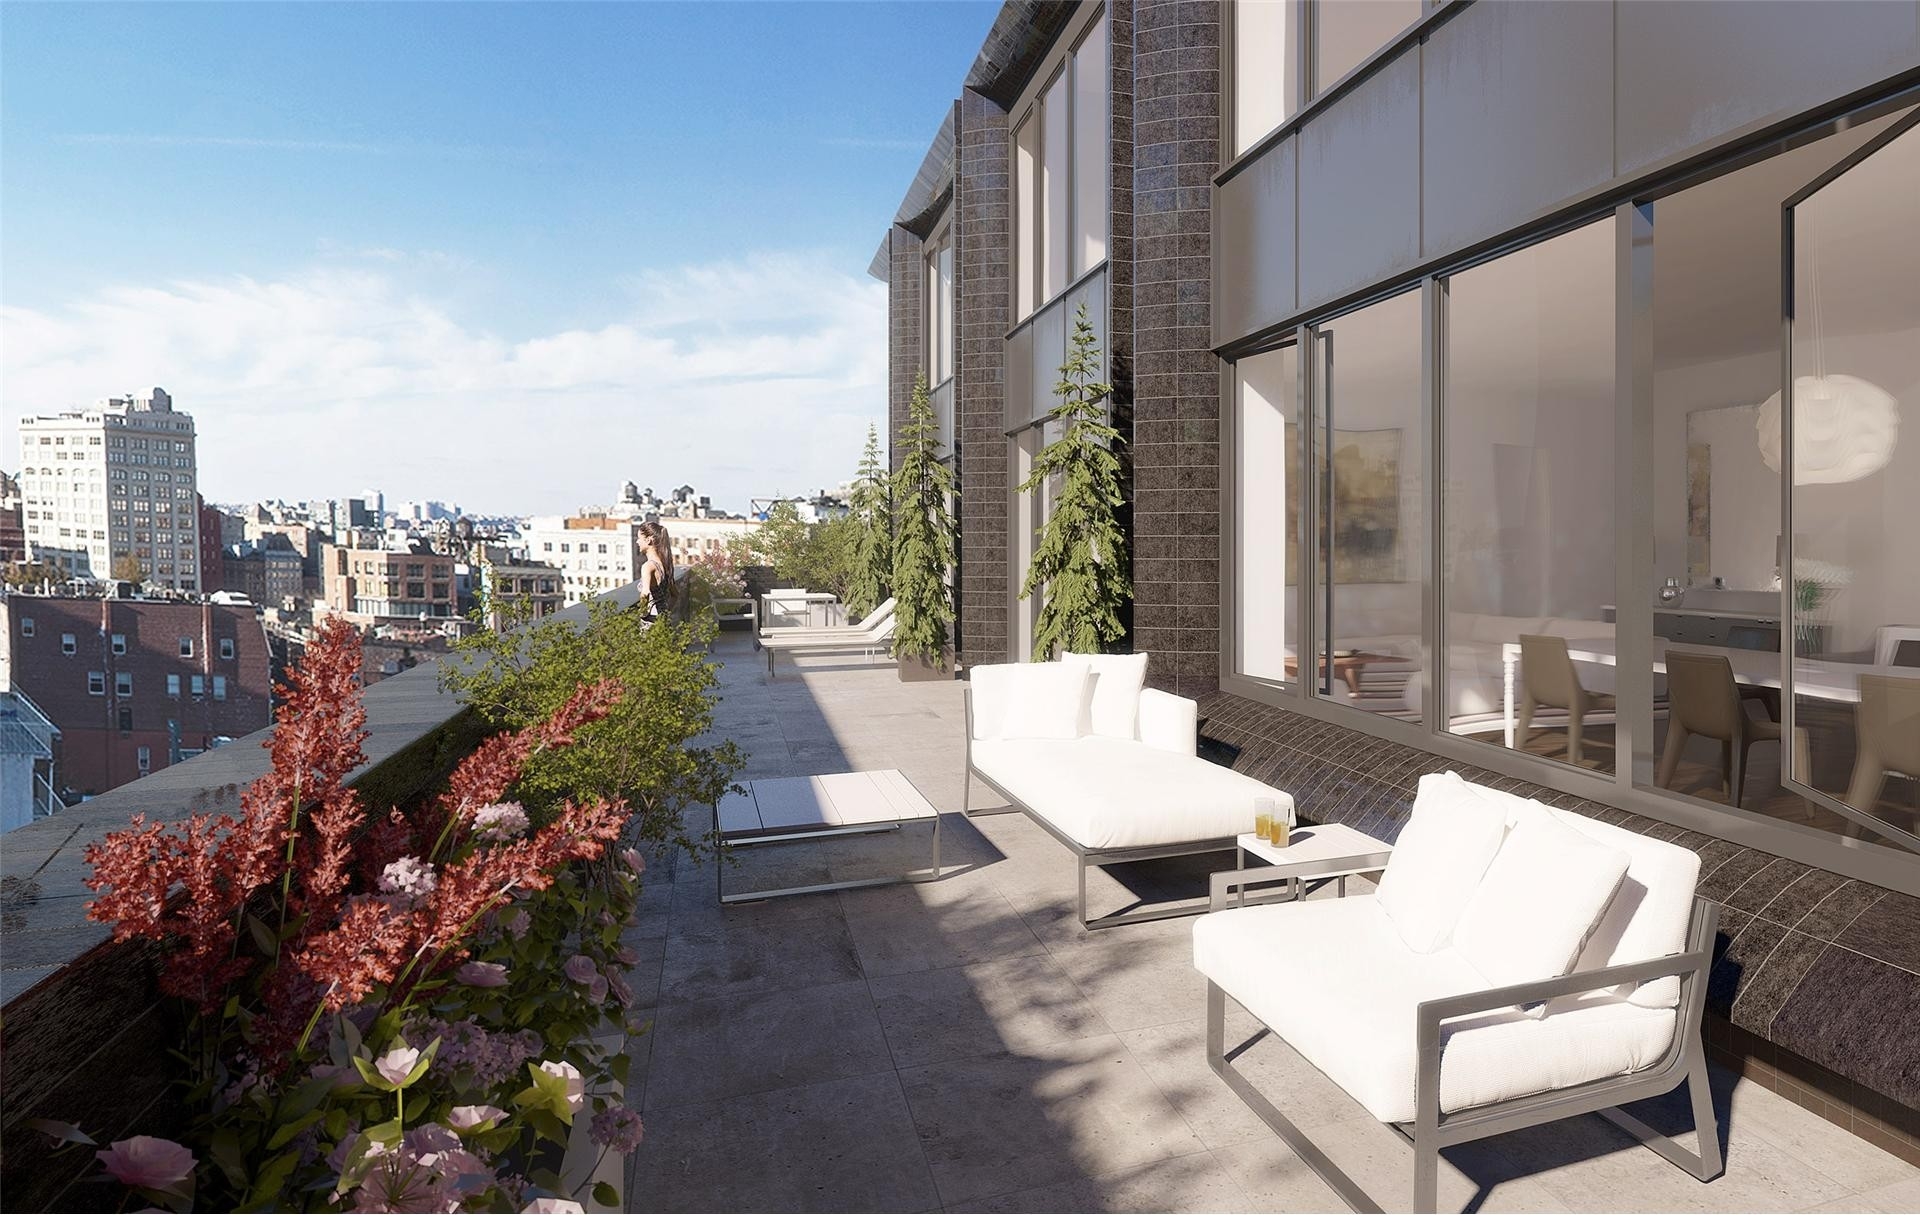 1. Condominiums for Sale at Franklin Place, 5 FRANKLIN PL, 16A TriBeCa, New York, NY 10013